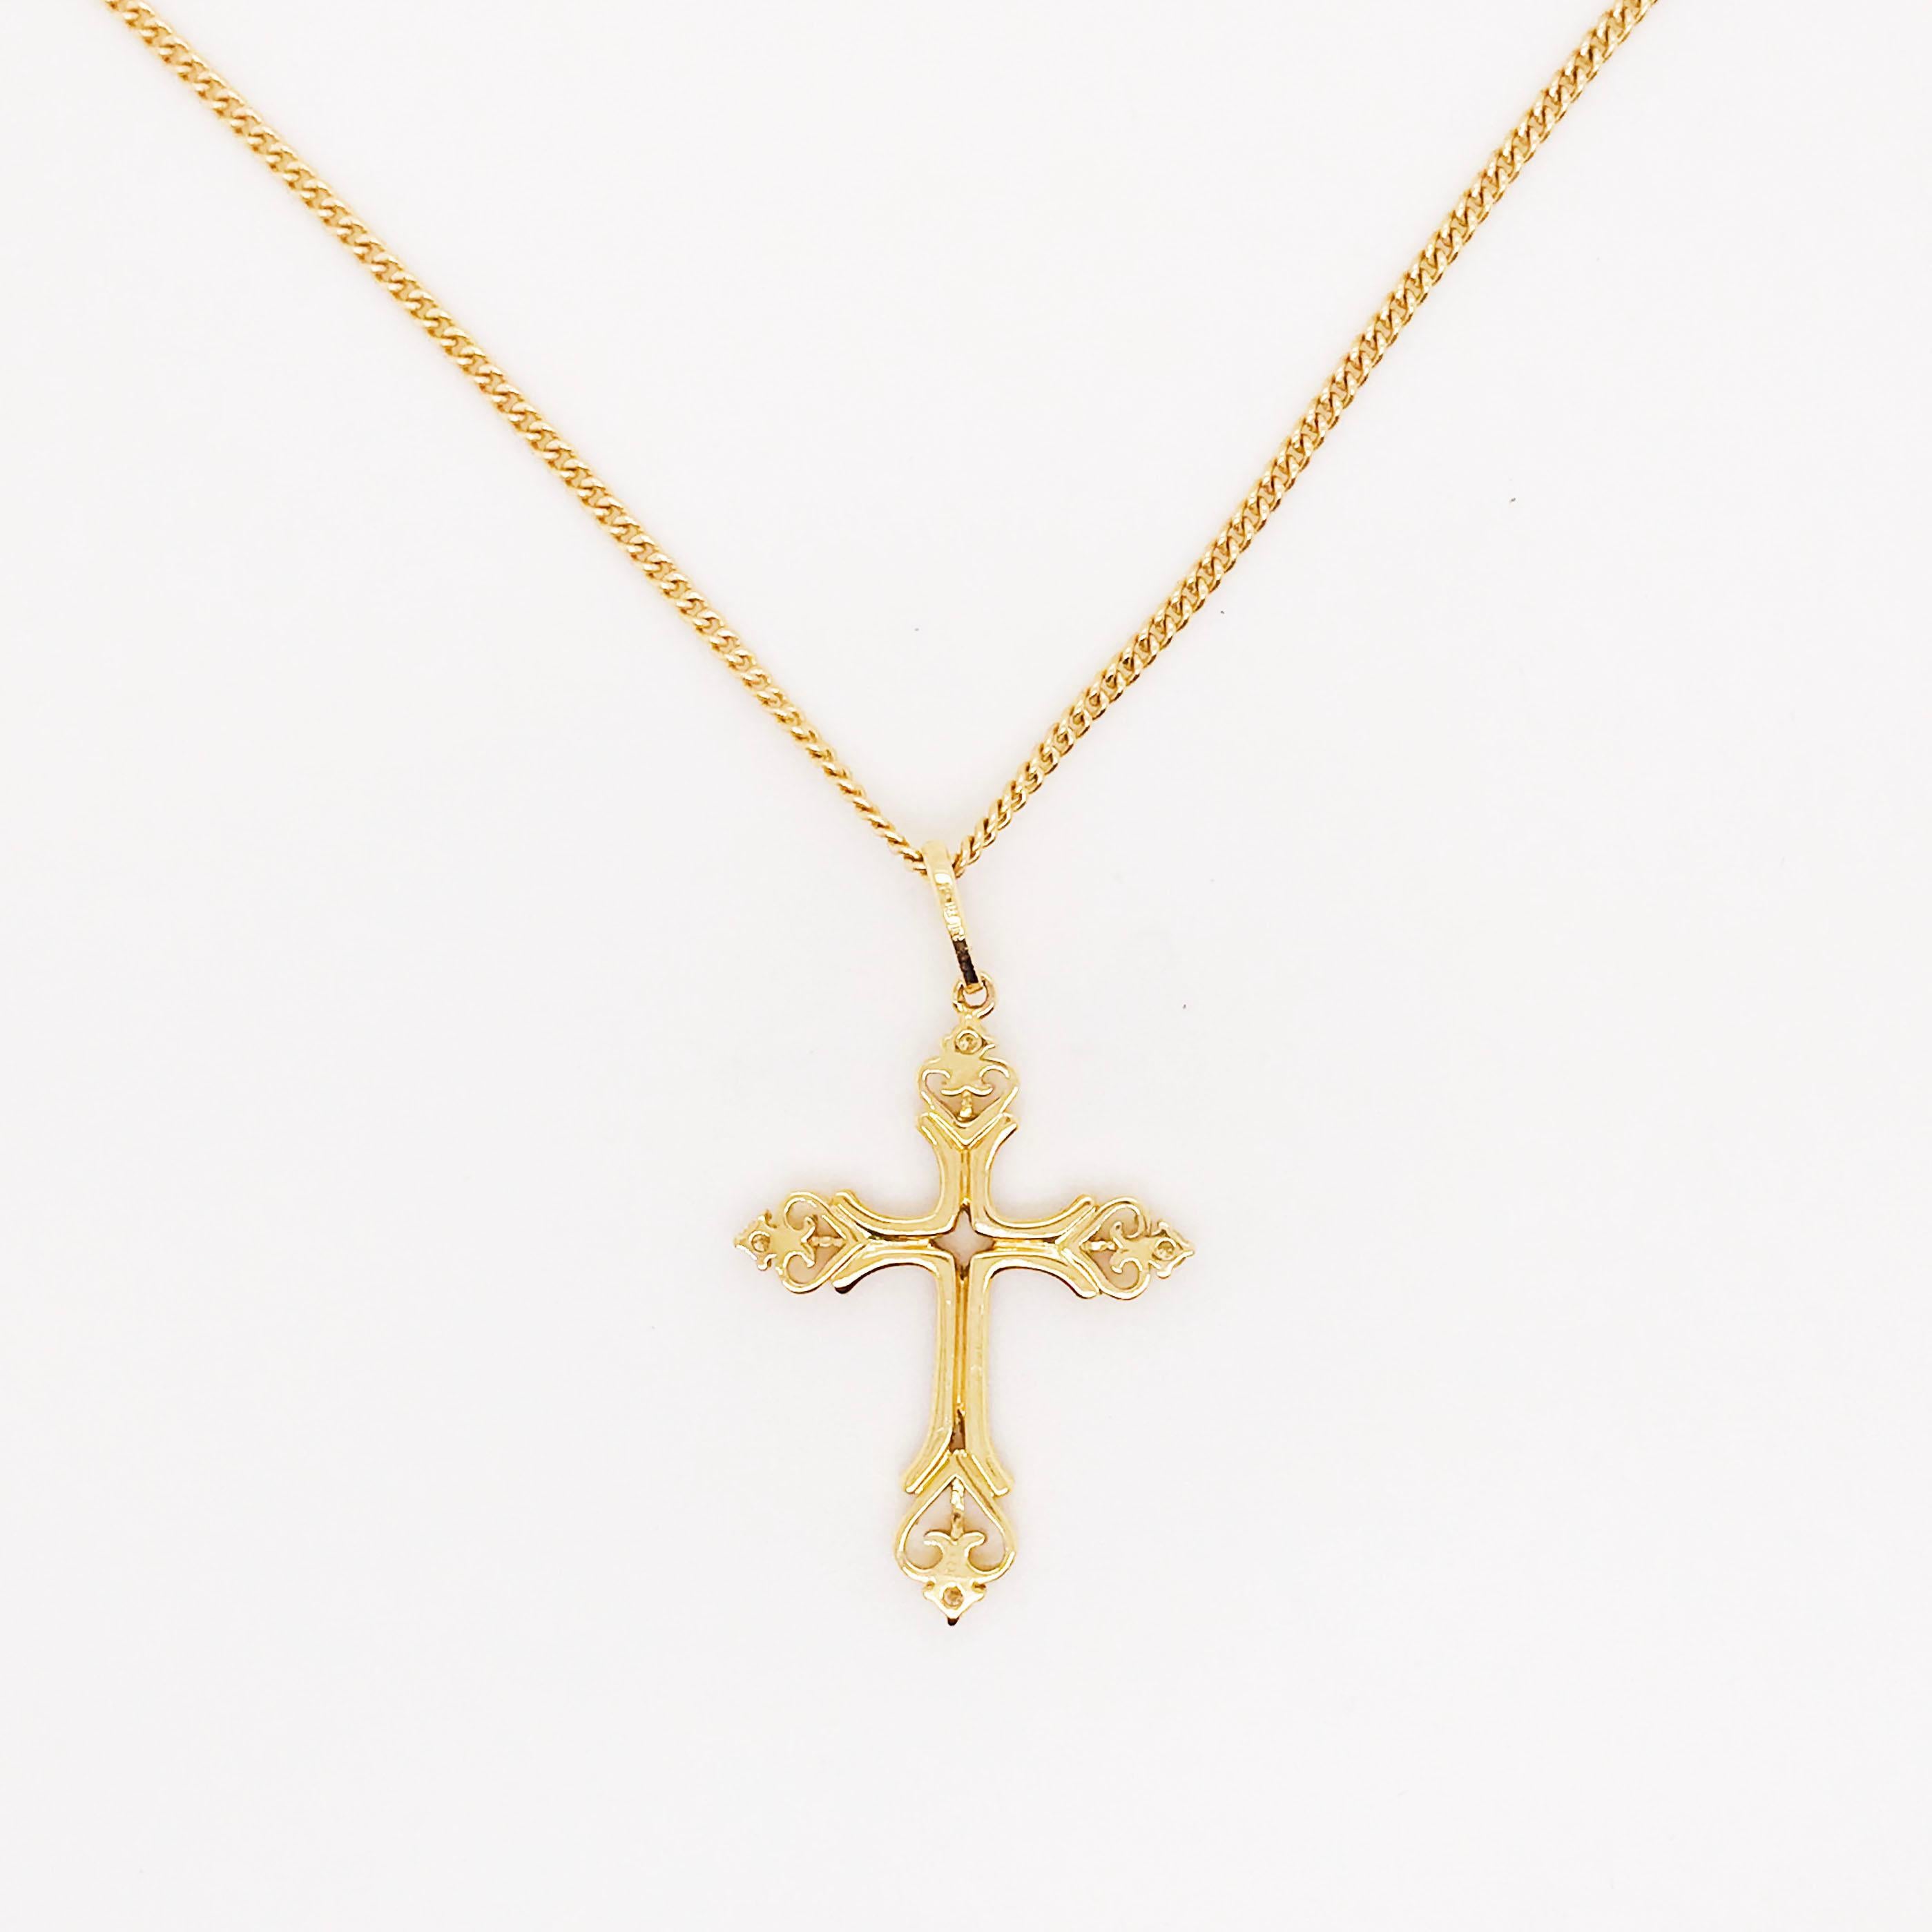 This gorgeous, intricate diamond cross pendant is a stunning and striking design. The cross pendant is made in 18 karat yellow gold with genuine, natural diamonds. The cross design has handmade beading and milgrain texture that balances the pave